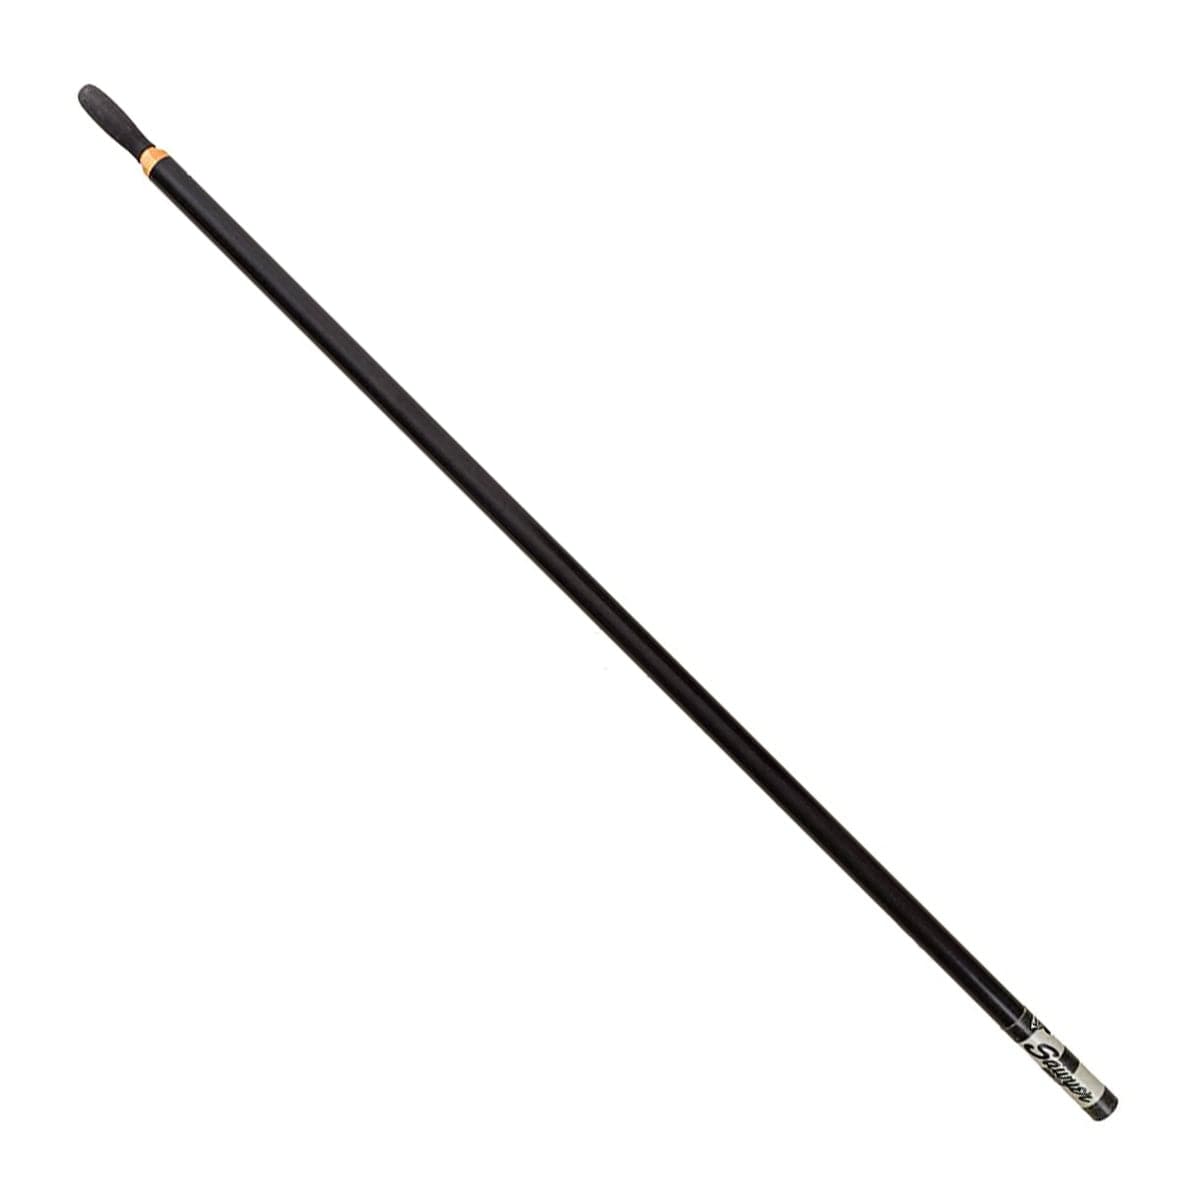 Featuring the Polecat Oar - Bare Shaft & Counter Balanced oar manufactured by Sawyer shown here from one angle.